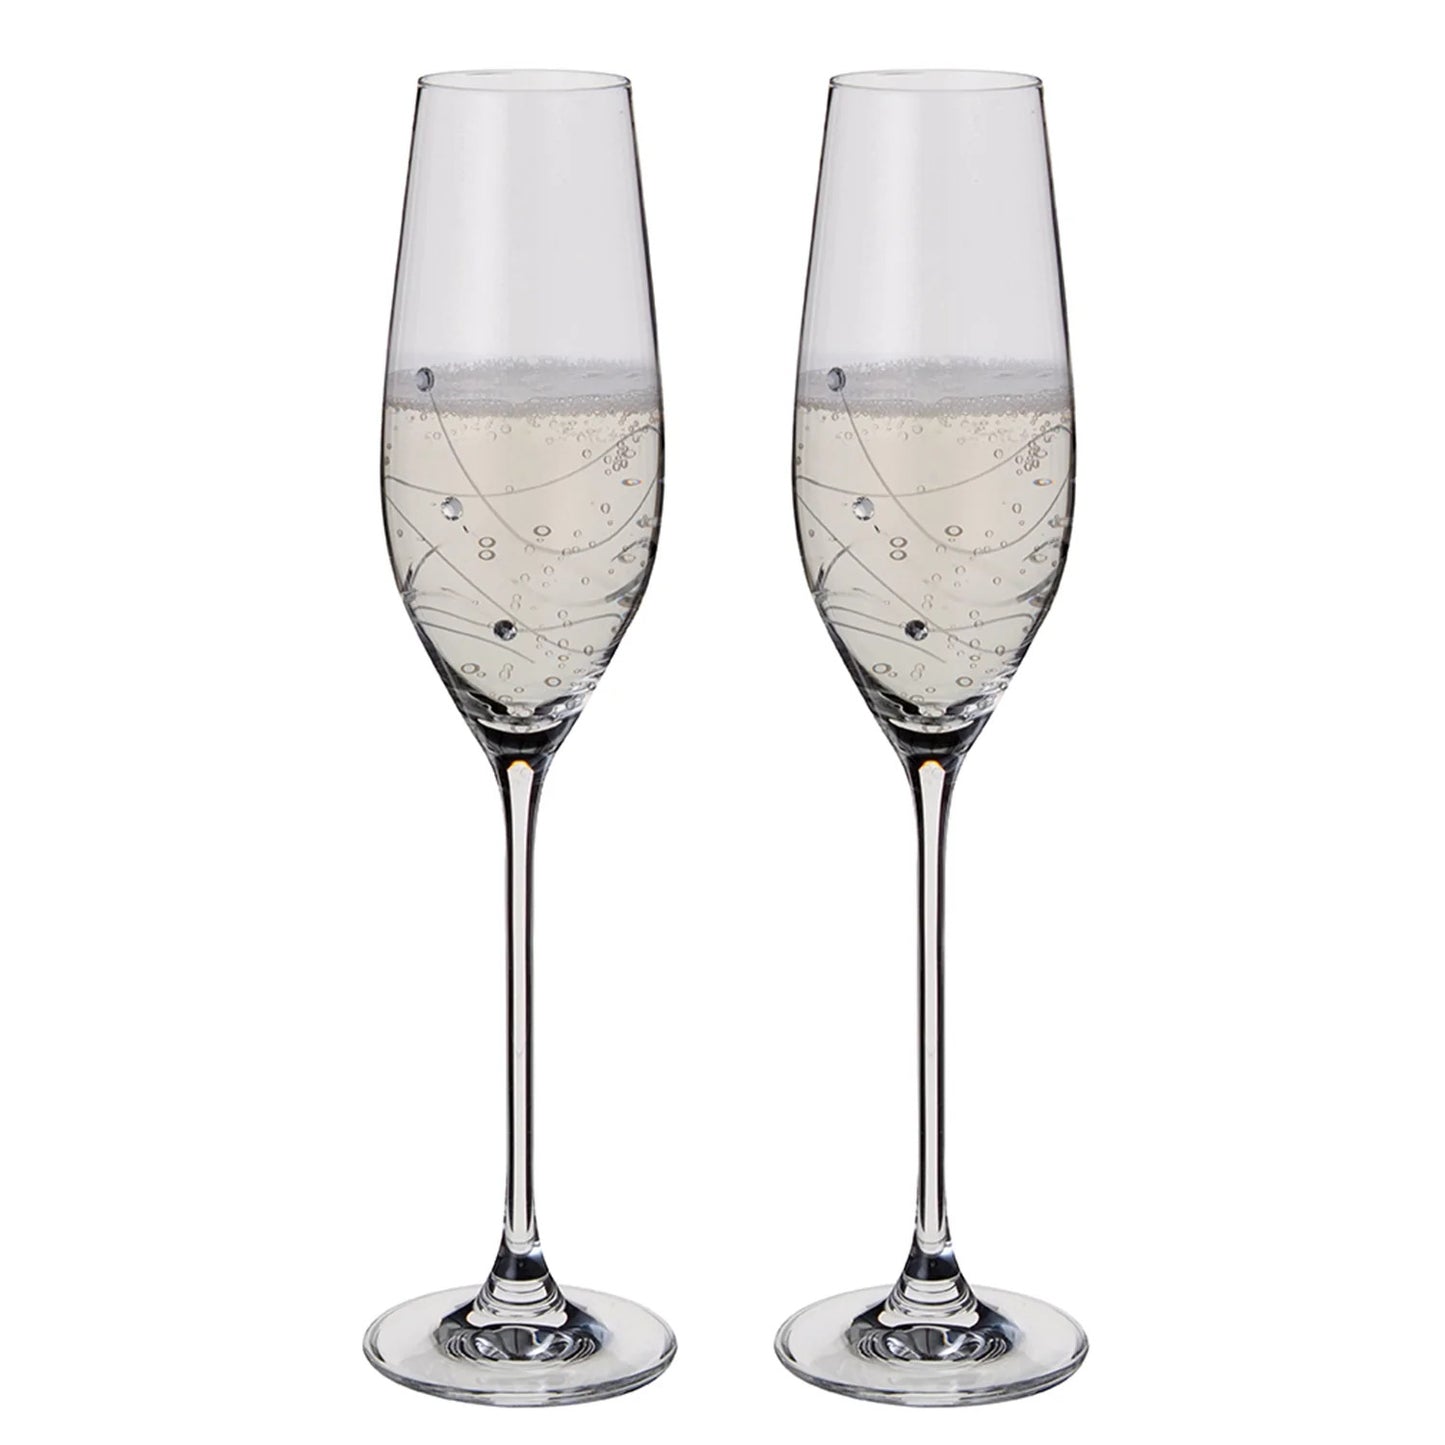 SWAVOKA Champagne Flutes - Crystal Champagne Flutes Glasses Set of 8, 7.1  Ounce Elegant Flutes with …See more SWAVOKA Champagne Flutes - Crystal